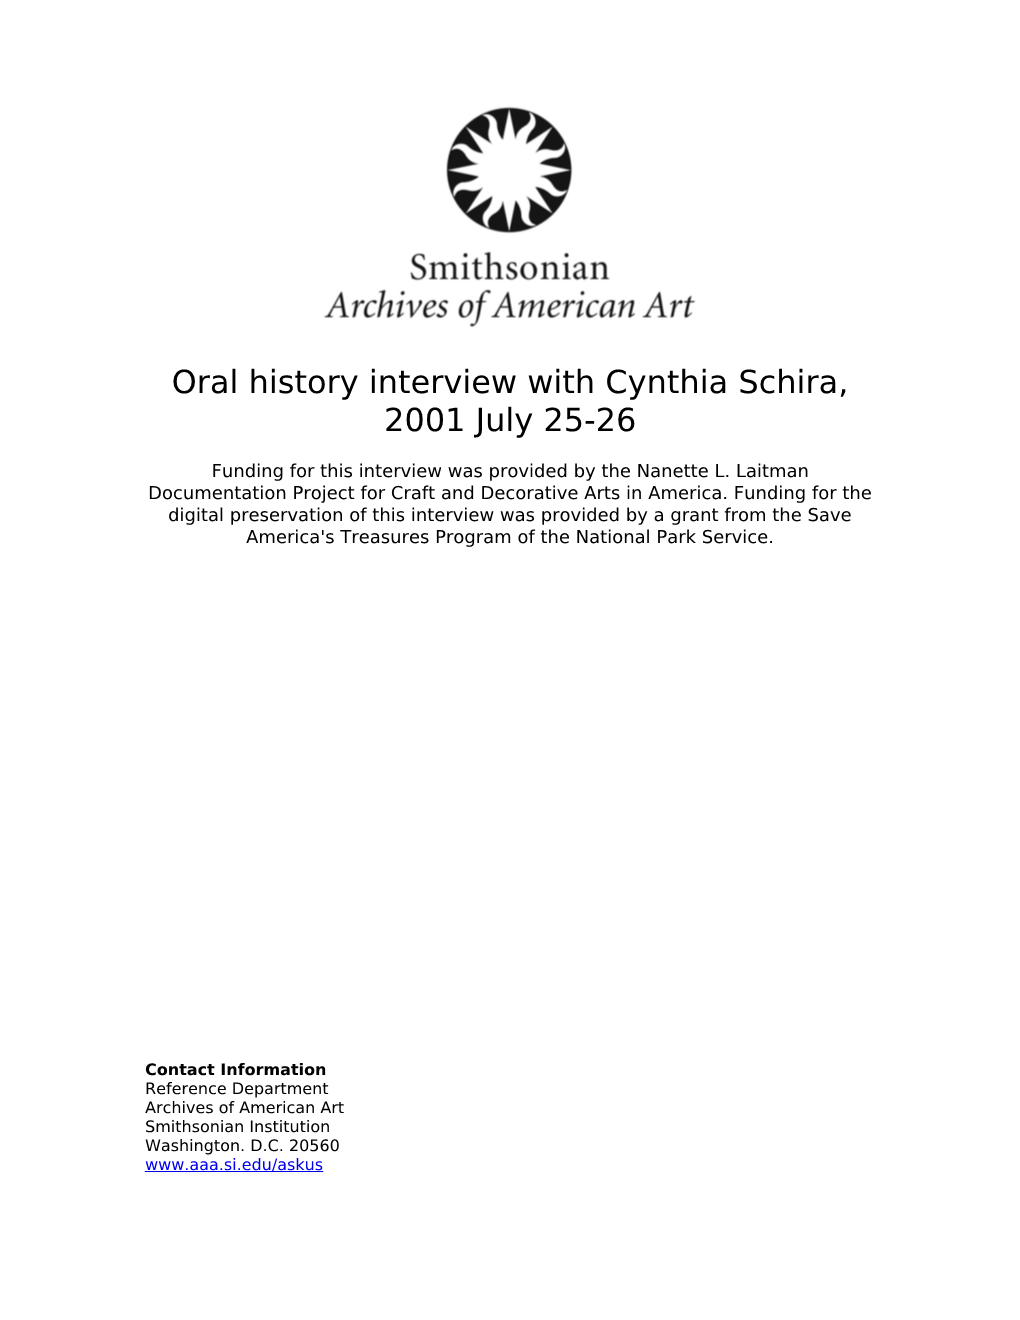 Oral History Interview with Cynthia Schira, 2001 July 25-26